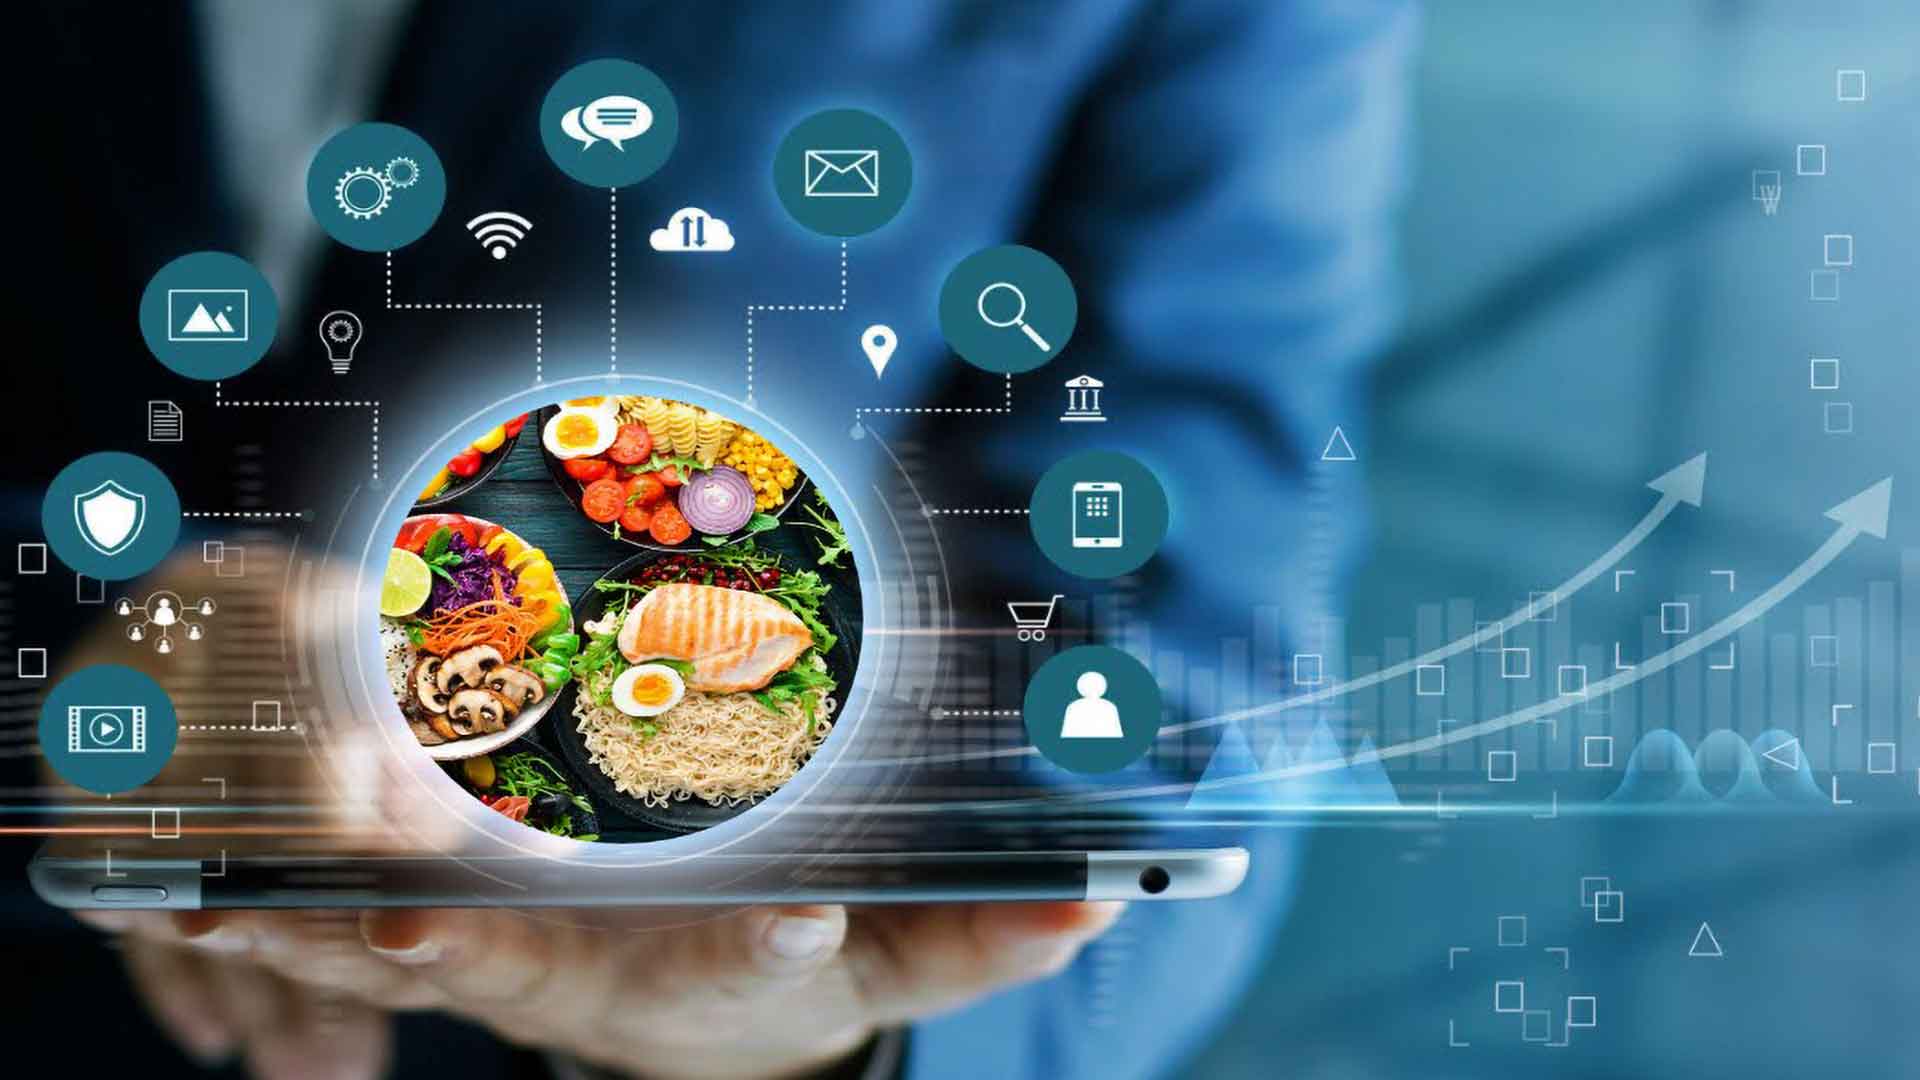 IoT and the Connected Restaurant Kitchen